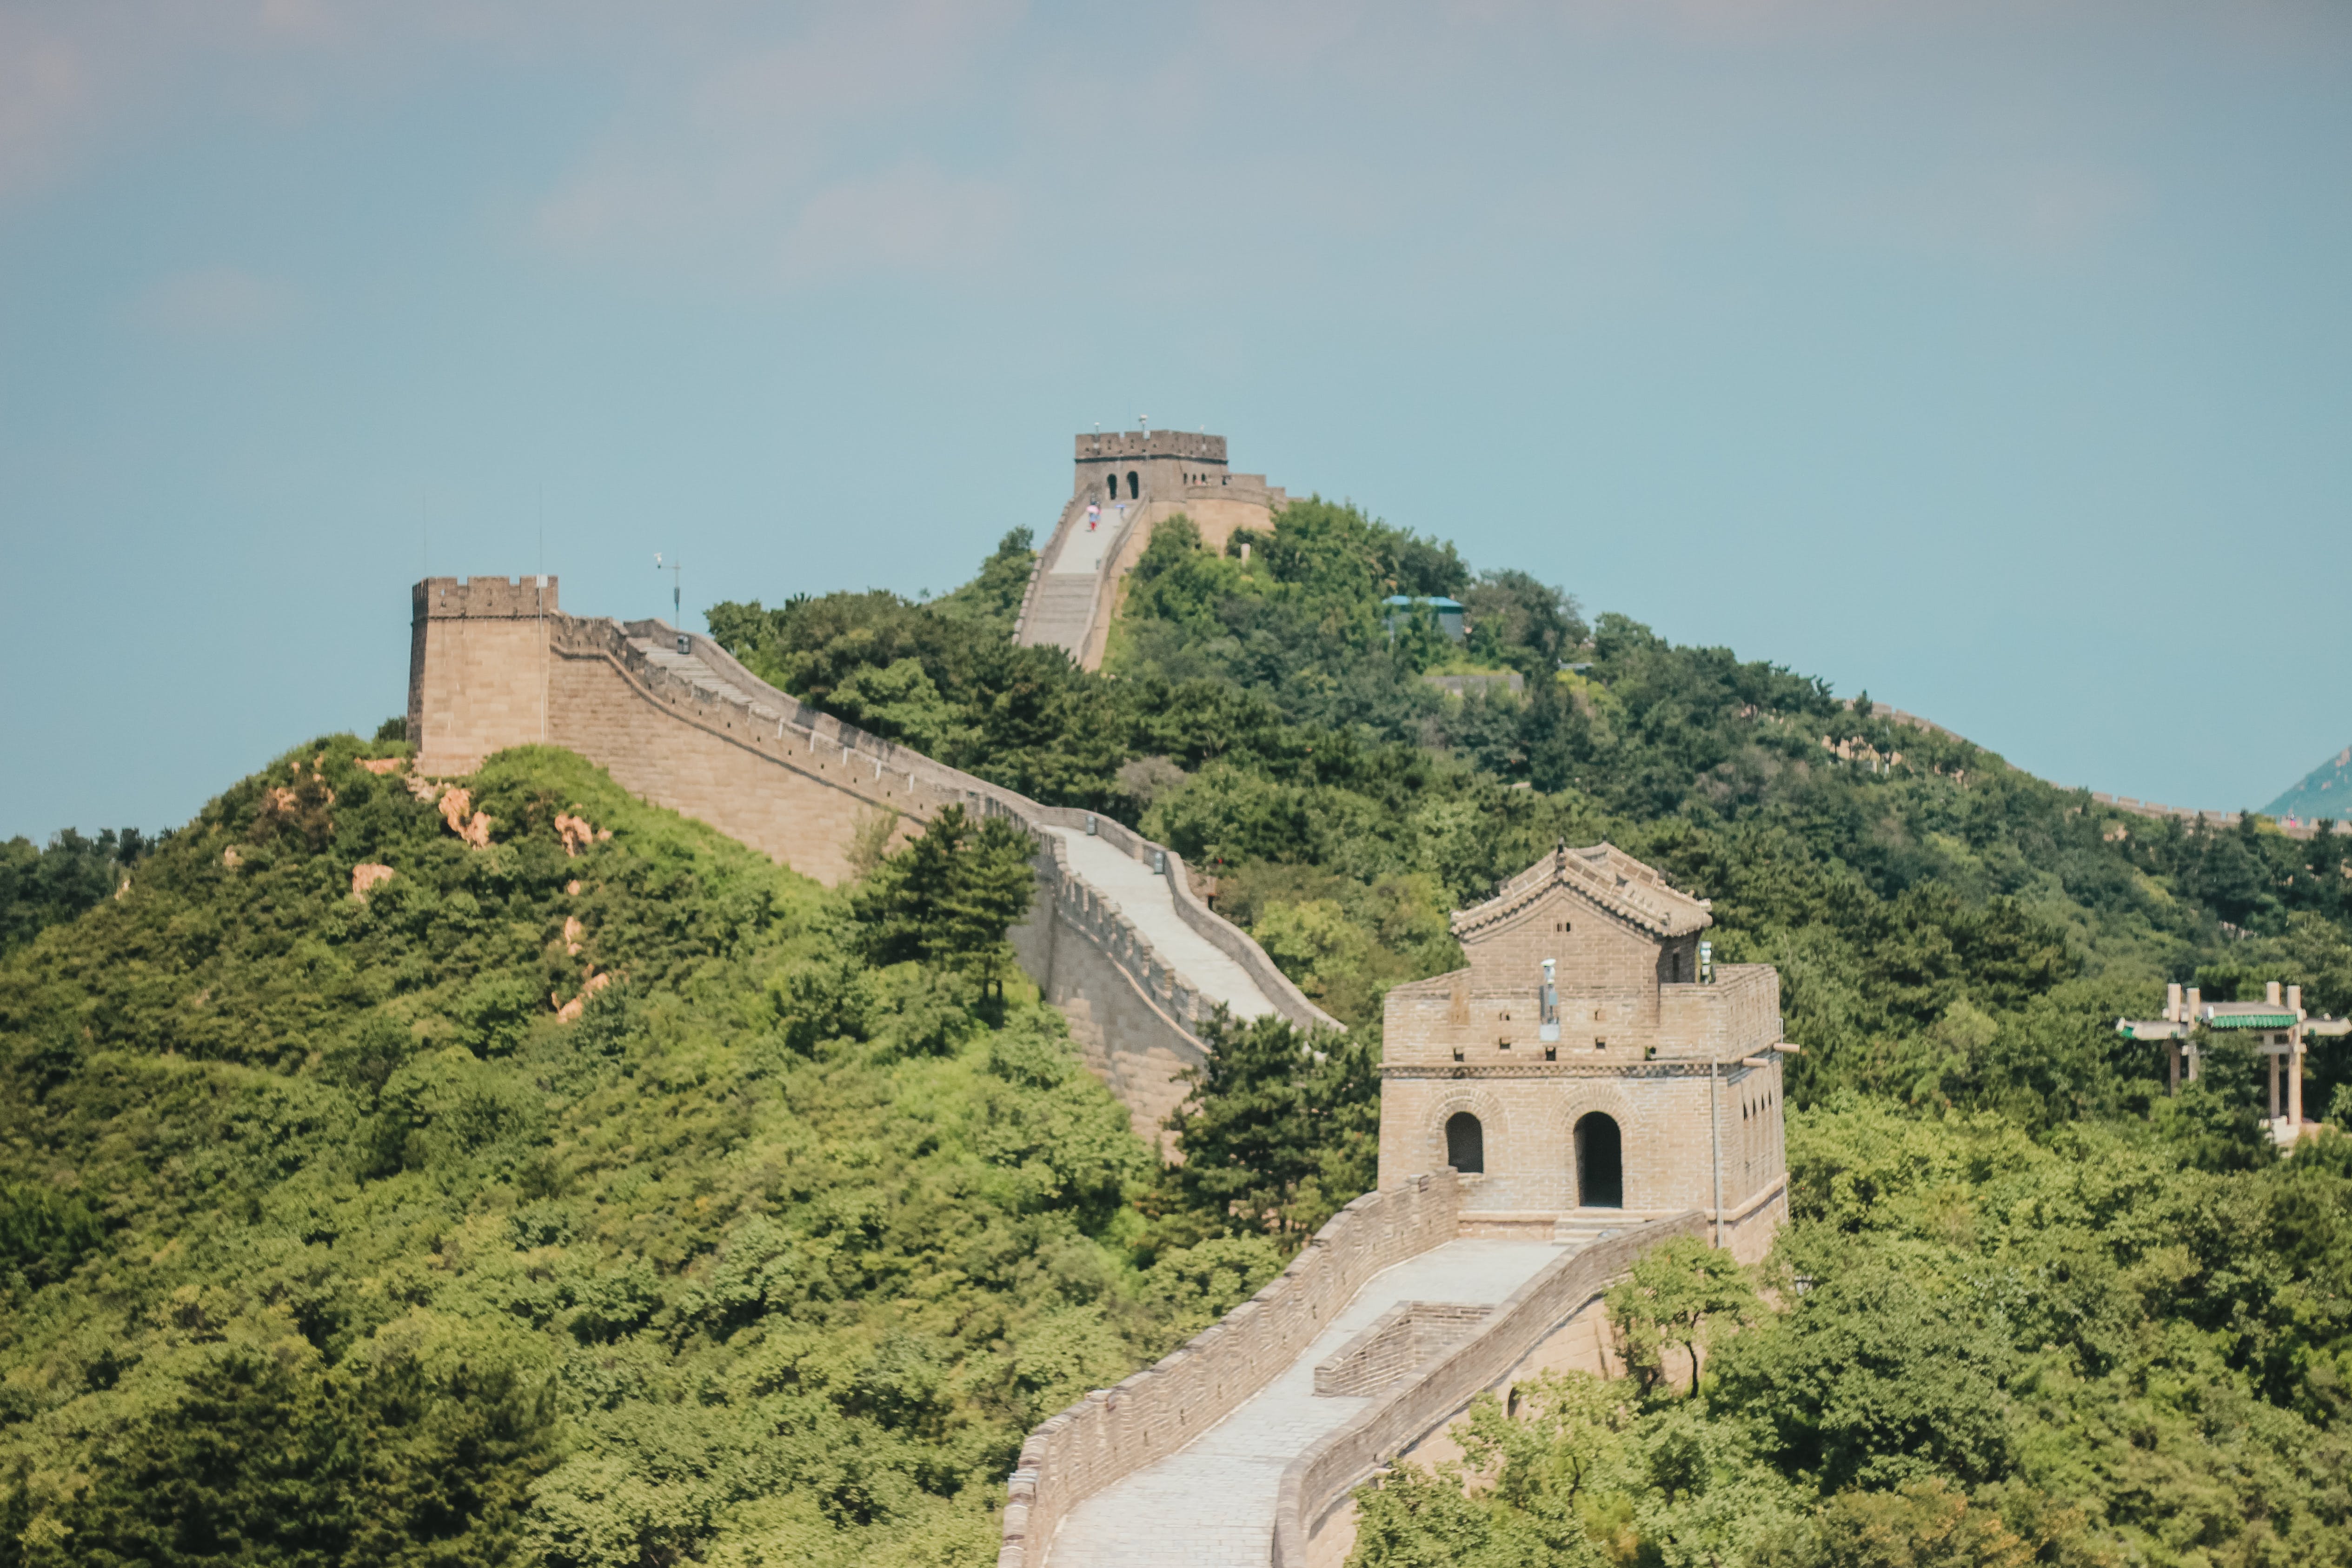 Check Out These Myths and Truths About the Great Wall of China